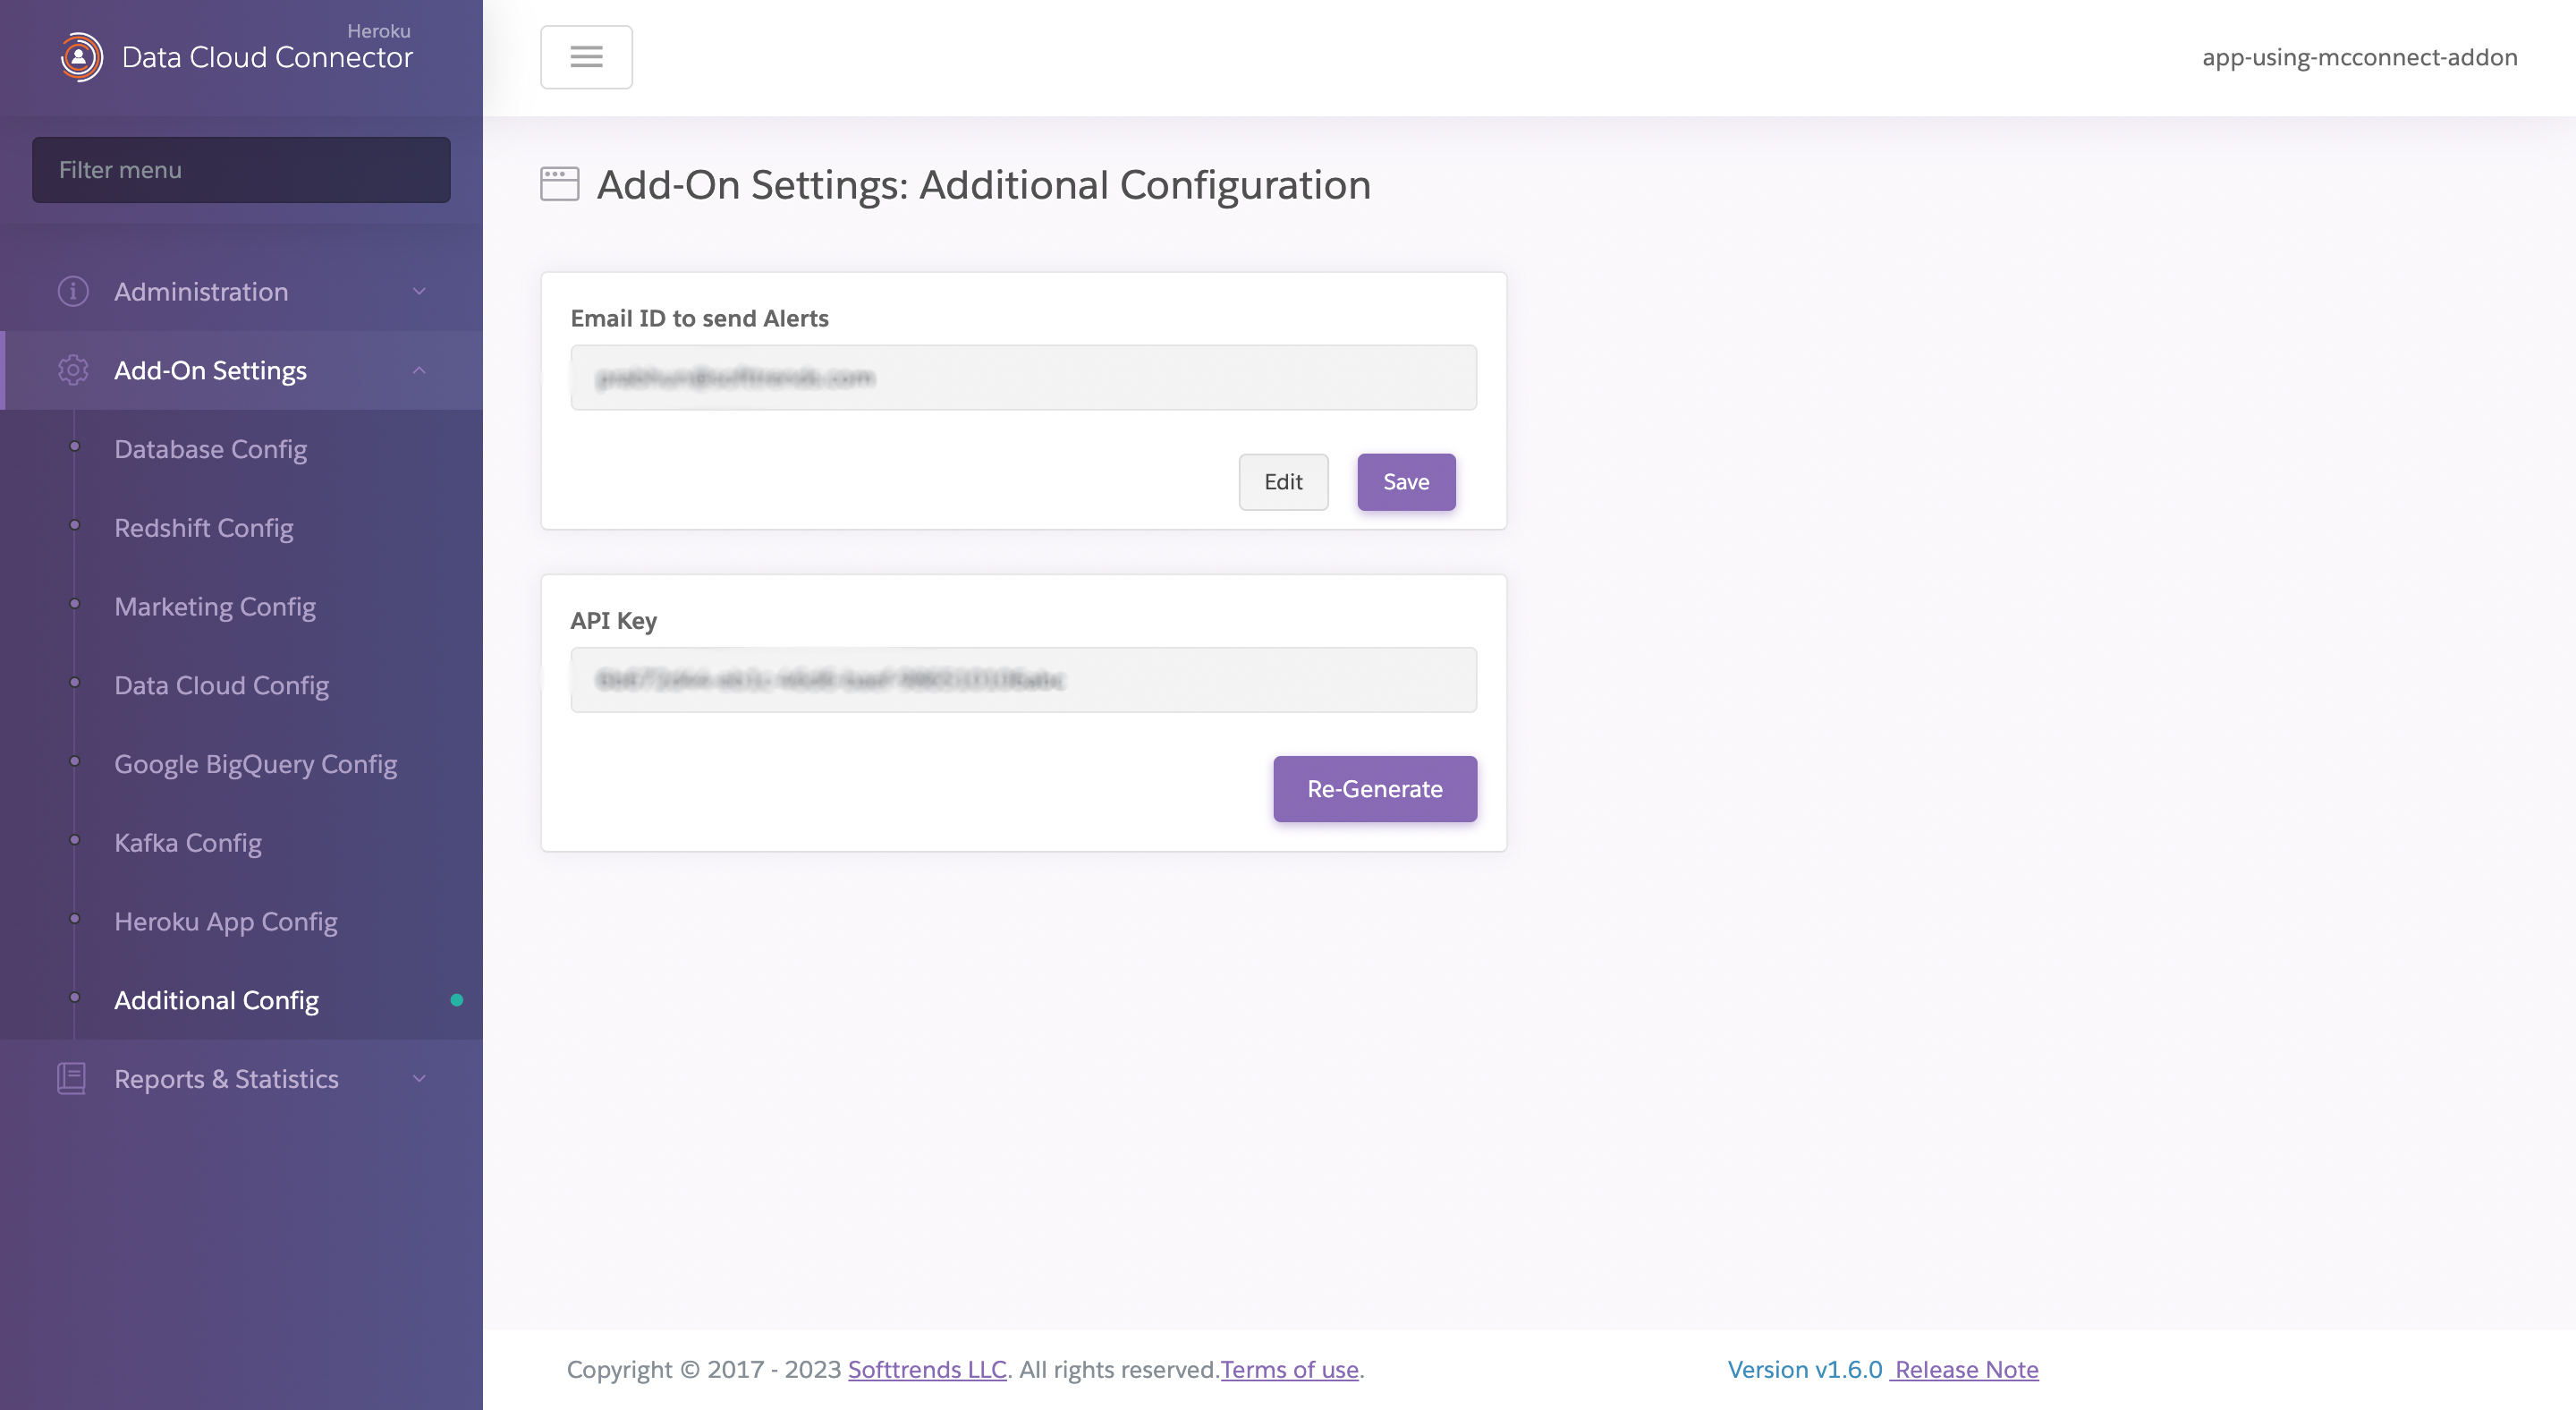 A screenshot of the Additional Configuration page showing a field to configure an email address for alerts, as well as the API Key for the Marketing Connector API.